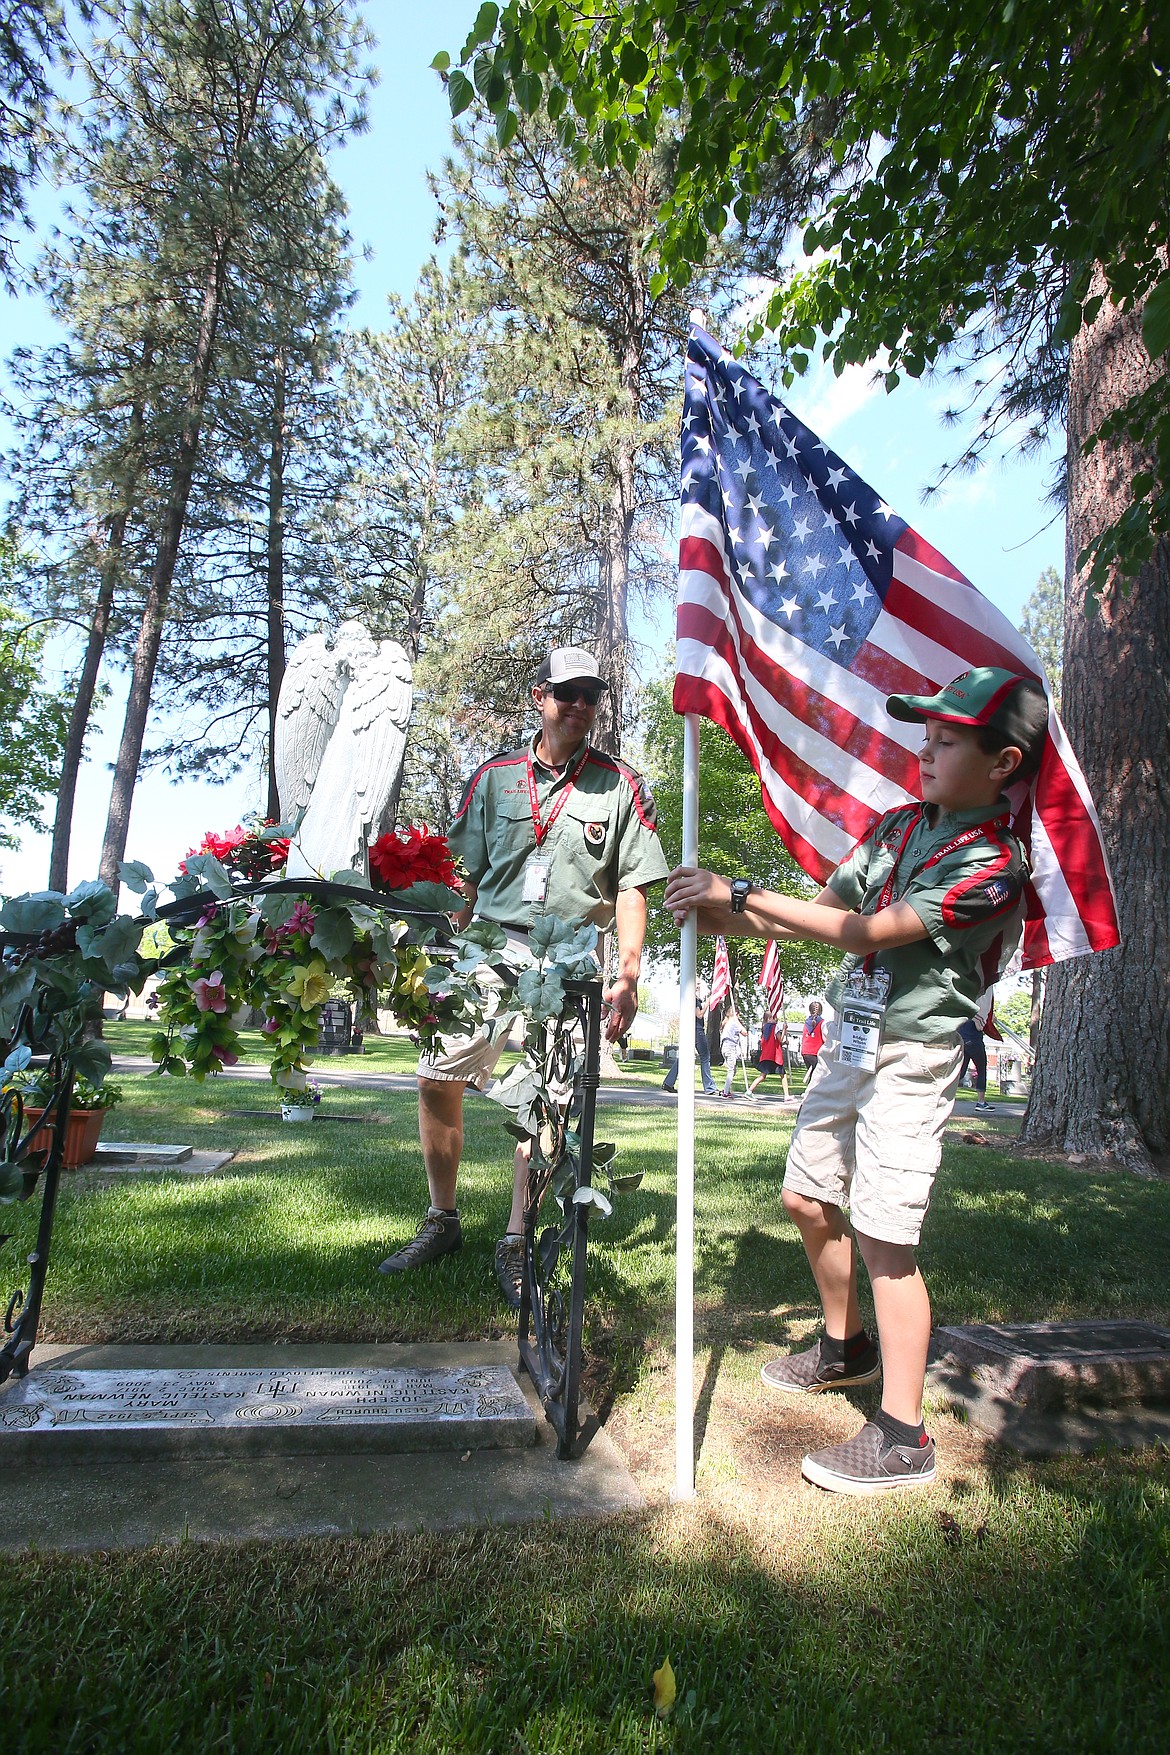 Trail Life USA patrol member Bridger Wilson, 9, secures an American flag at a gravesite as he and his dad, Brent Wilson, help place more than 600 flags in Evergreen Cemetery. The annual flag placement on veteran and military graves ahead of Memorial Day is coordinated by the Post Falls American Legion Post 143. The city of Post Falls and the Legion will host a Memorial Day ceremony in the cemetery at 11 a.m. Monday. Evergreen Cemetery is at 2834 N. Spokane St.